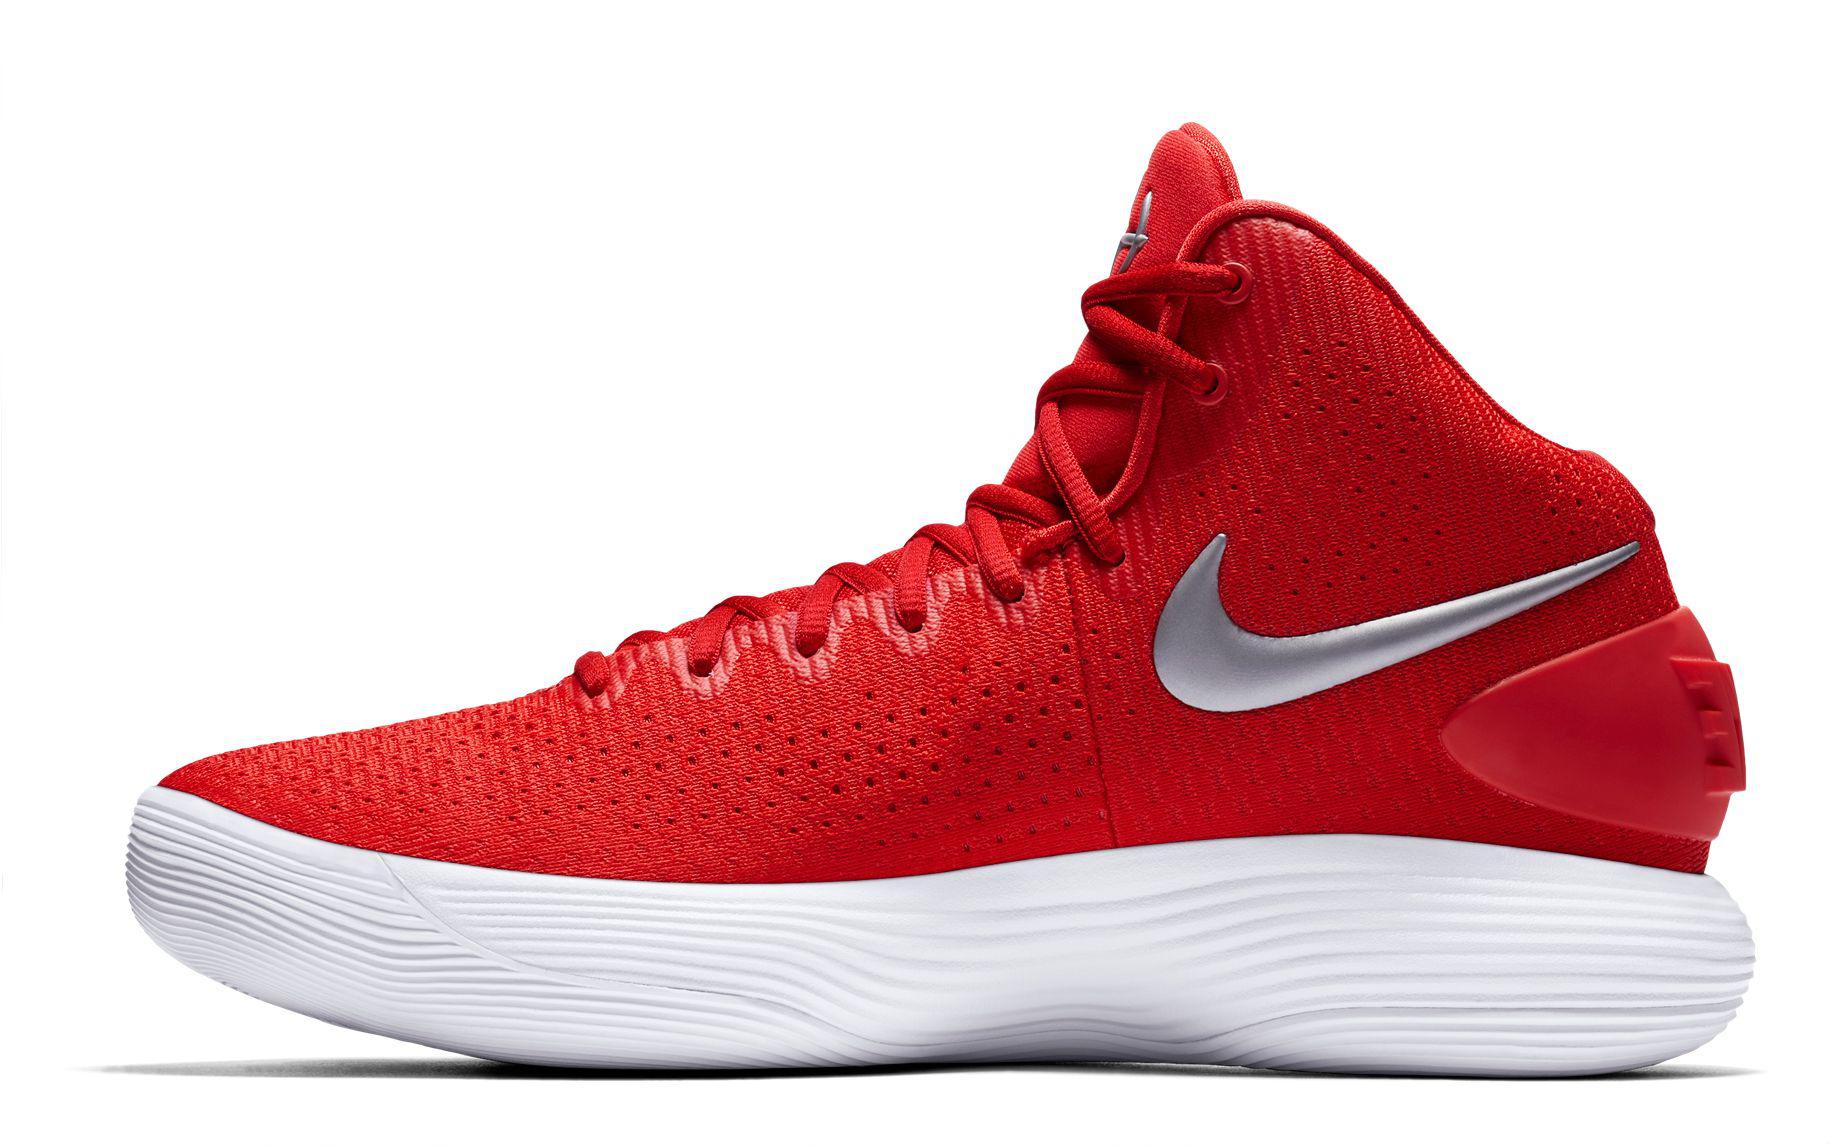 Lyst - Nike React Hyperdunk 2017 Basketball Shoes in Red for Men